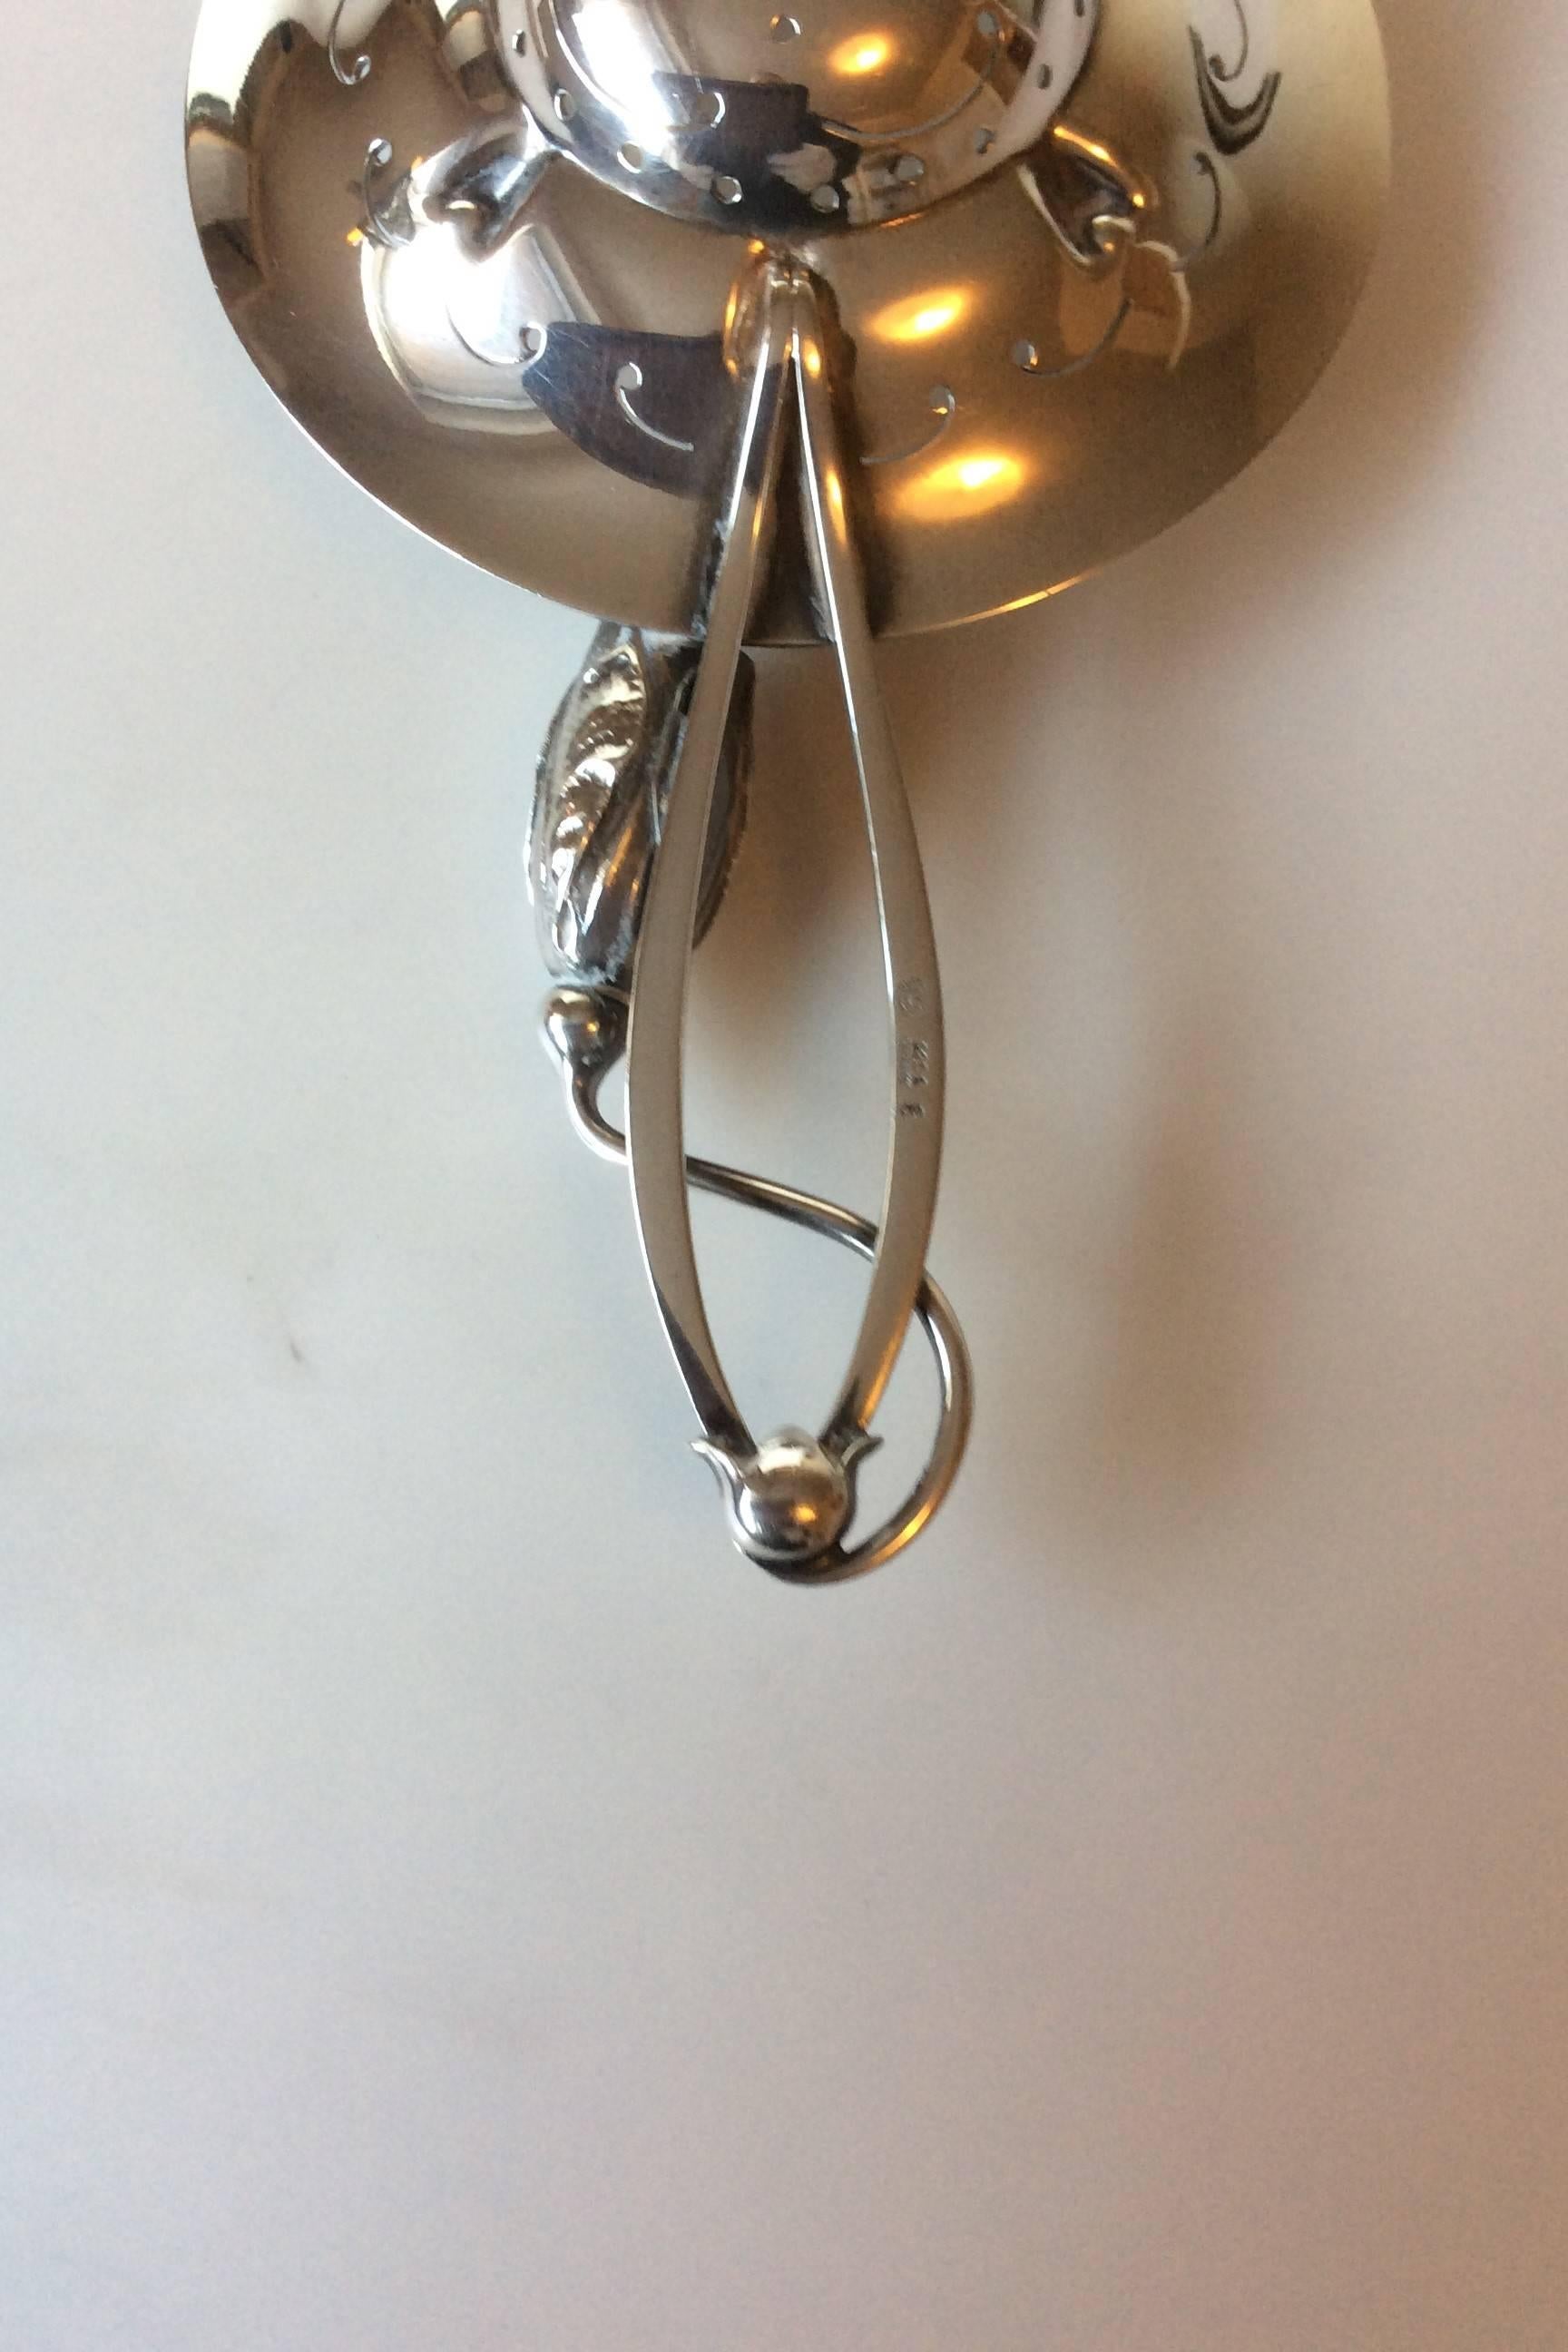 Georg Jensen blossom sterling silver tea strainer no 8. Measures 14 cm / 5 33/64 in. and is in perfect condition.